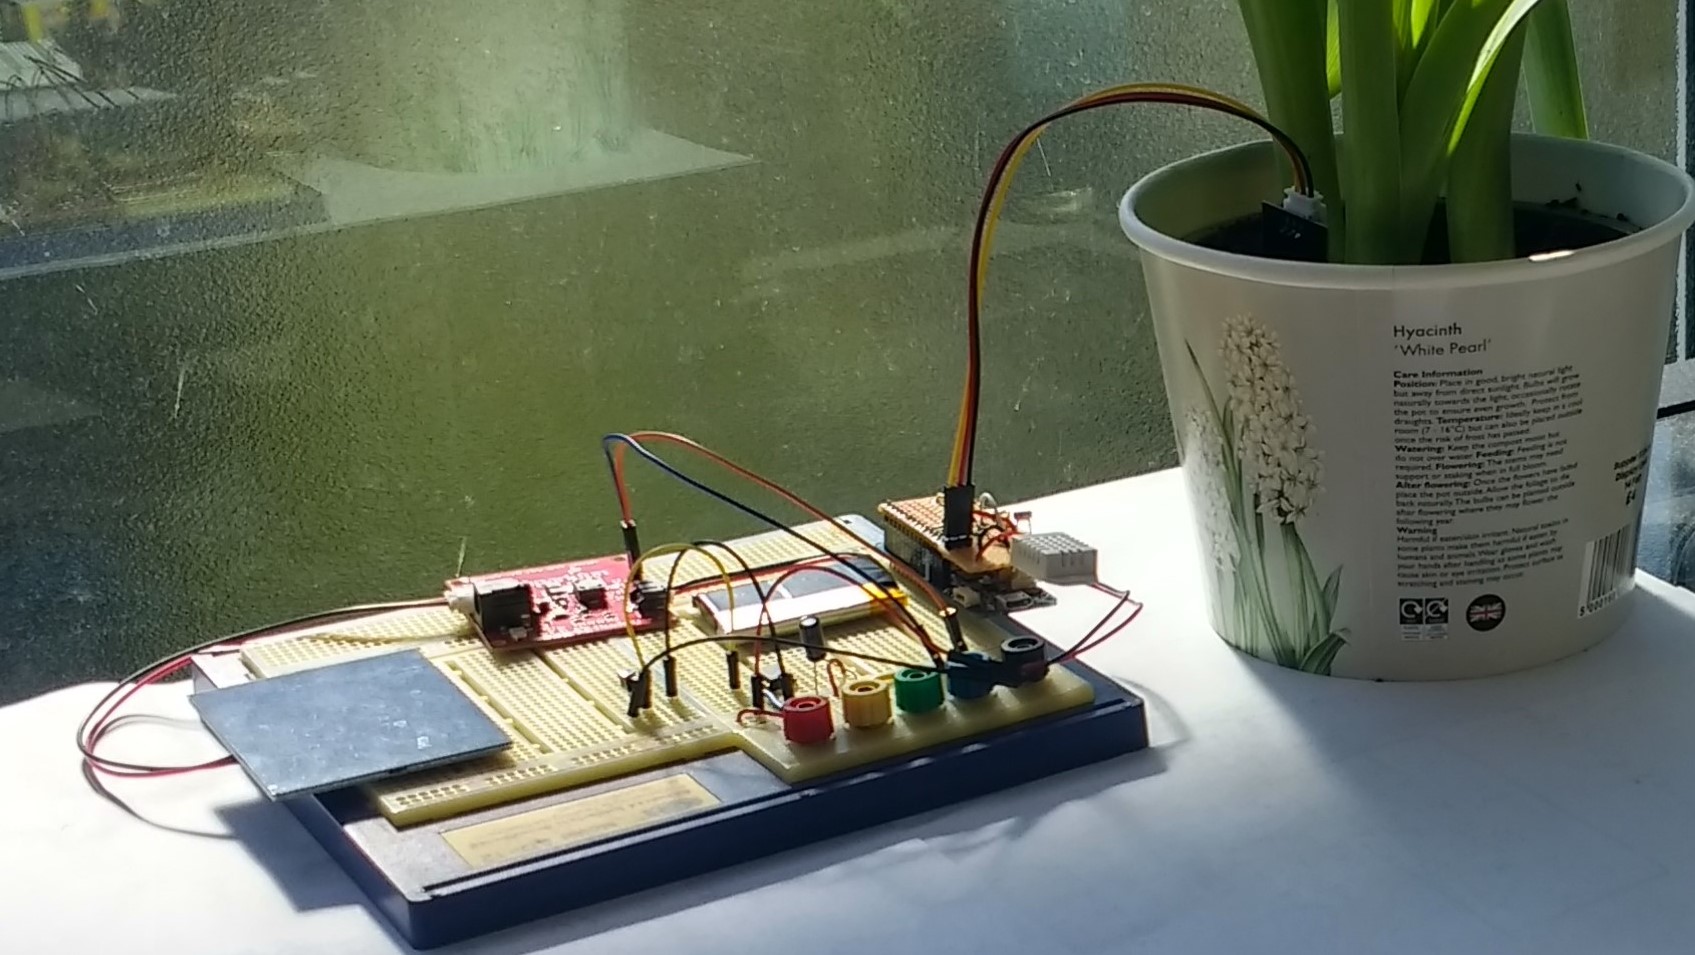 Making a Plant Monitor